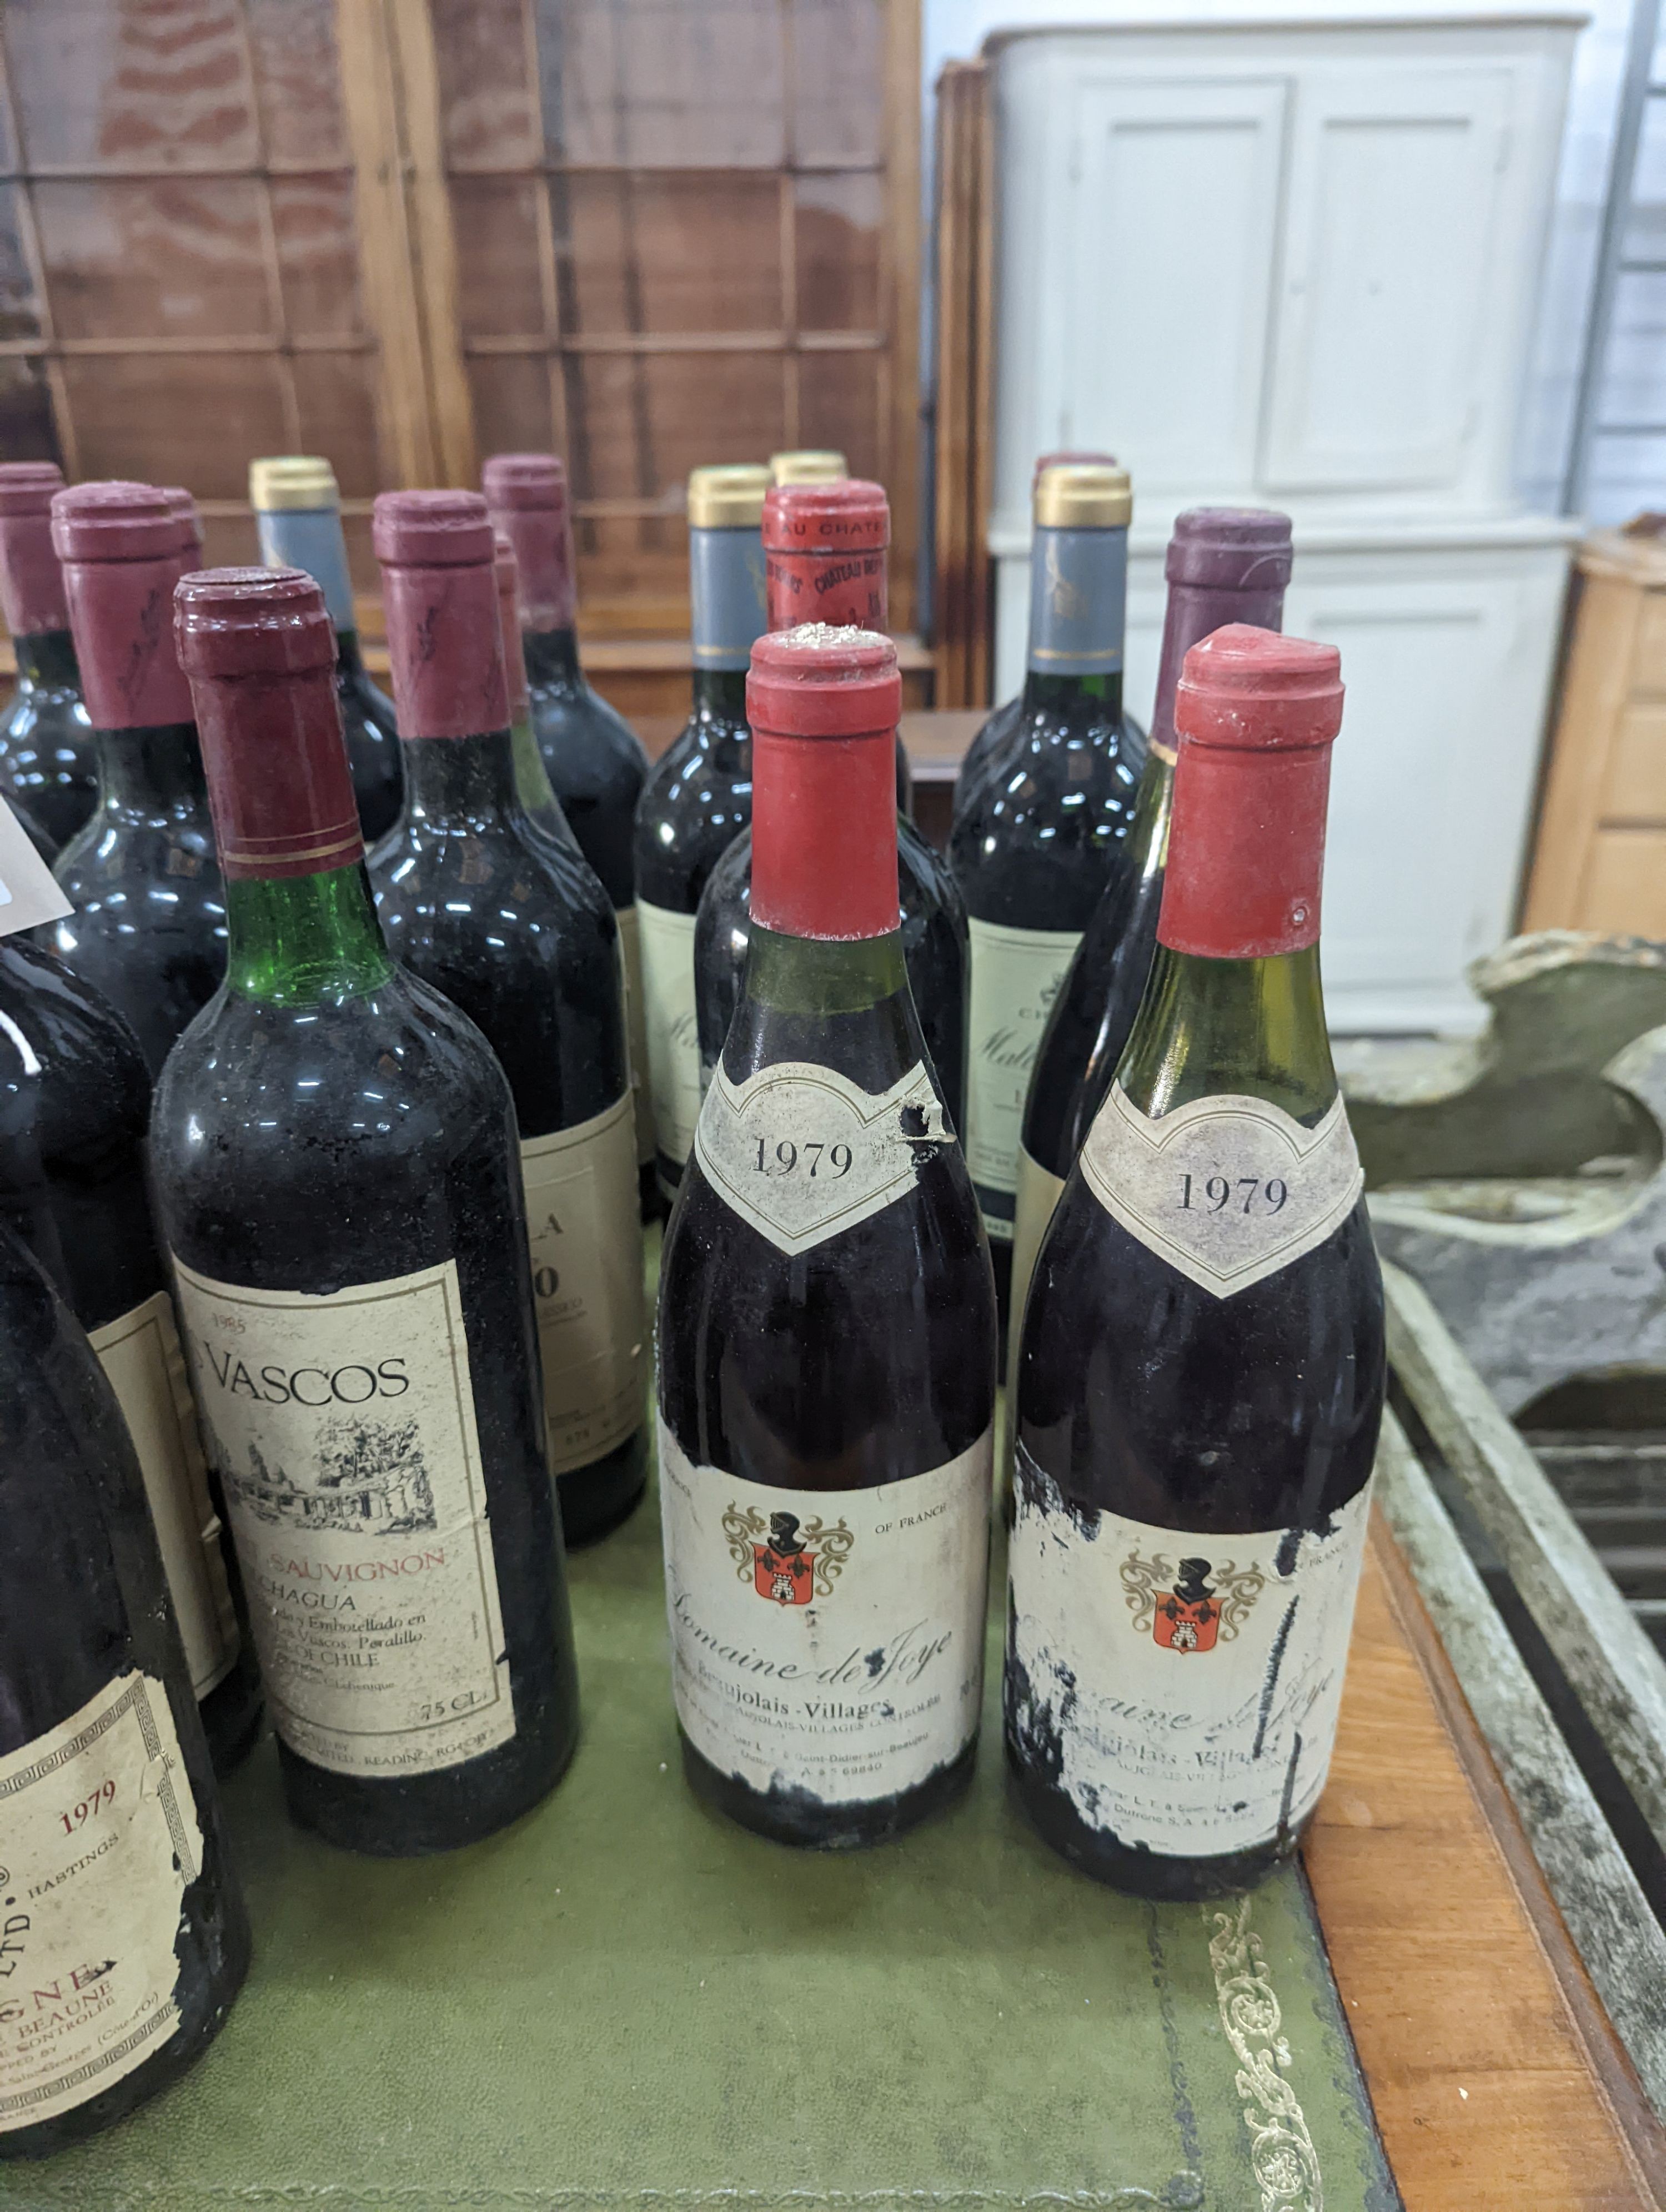 Twenty one bottles of assorted red wine, including Chateau Listrac 1996, assorted Cote de Beaune etc.